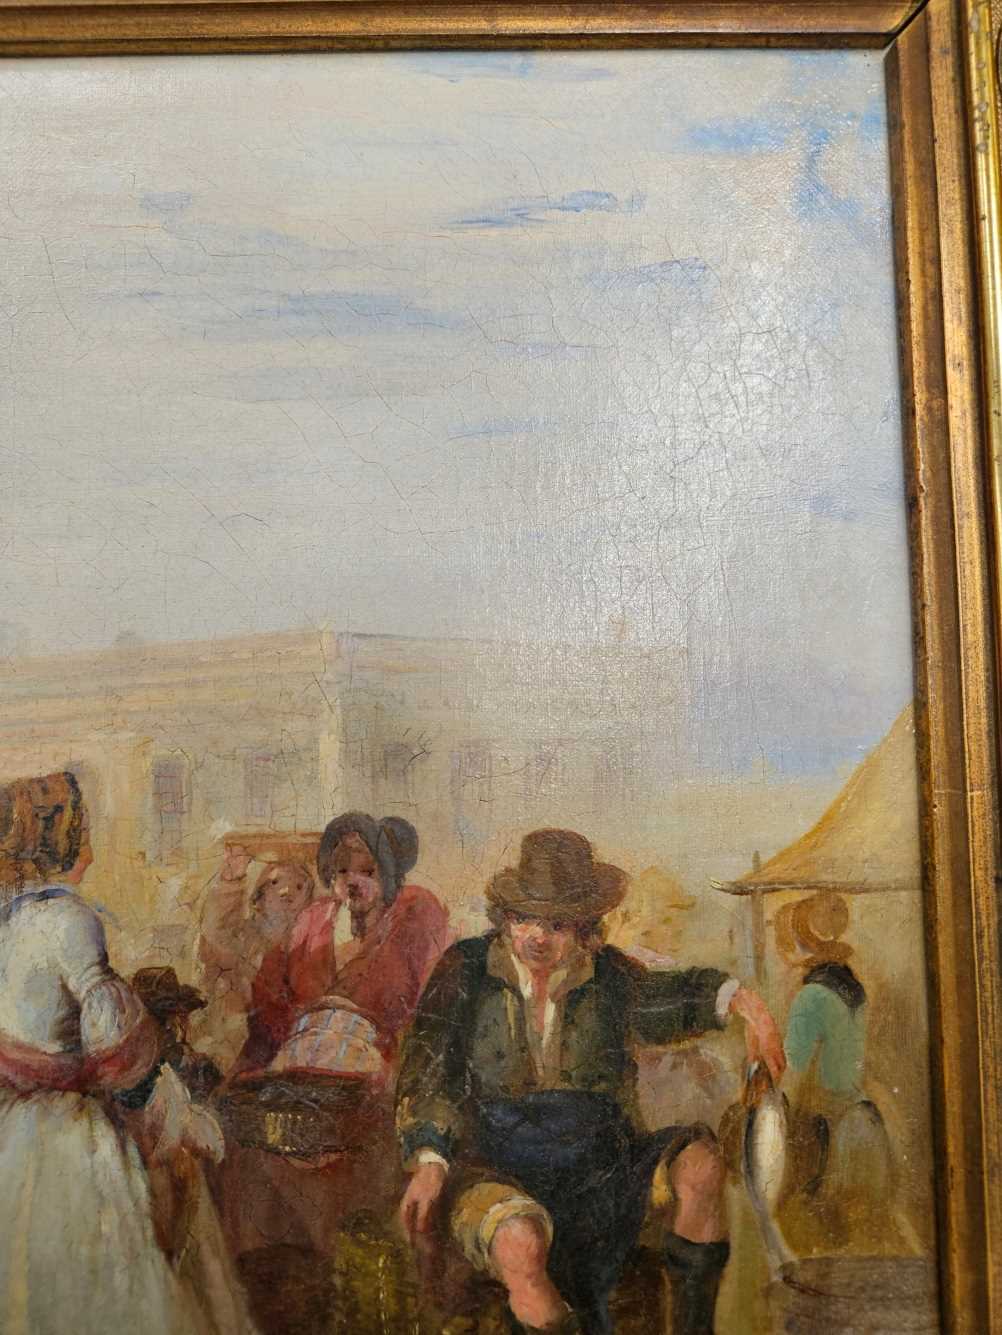 ENGLISH SCHOOL (19TH CENTURY), RAMSGATE MARKET, OIL ON CANVAS, 44 x 34cm. This has been cleaned - Image 5 of 9